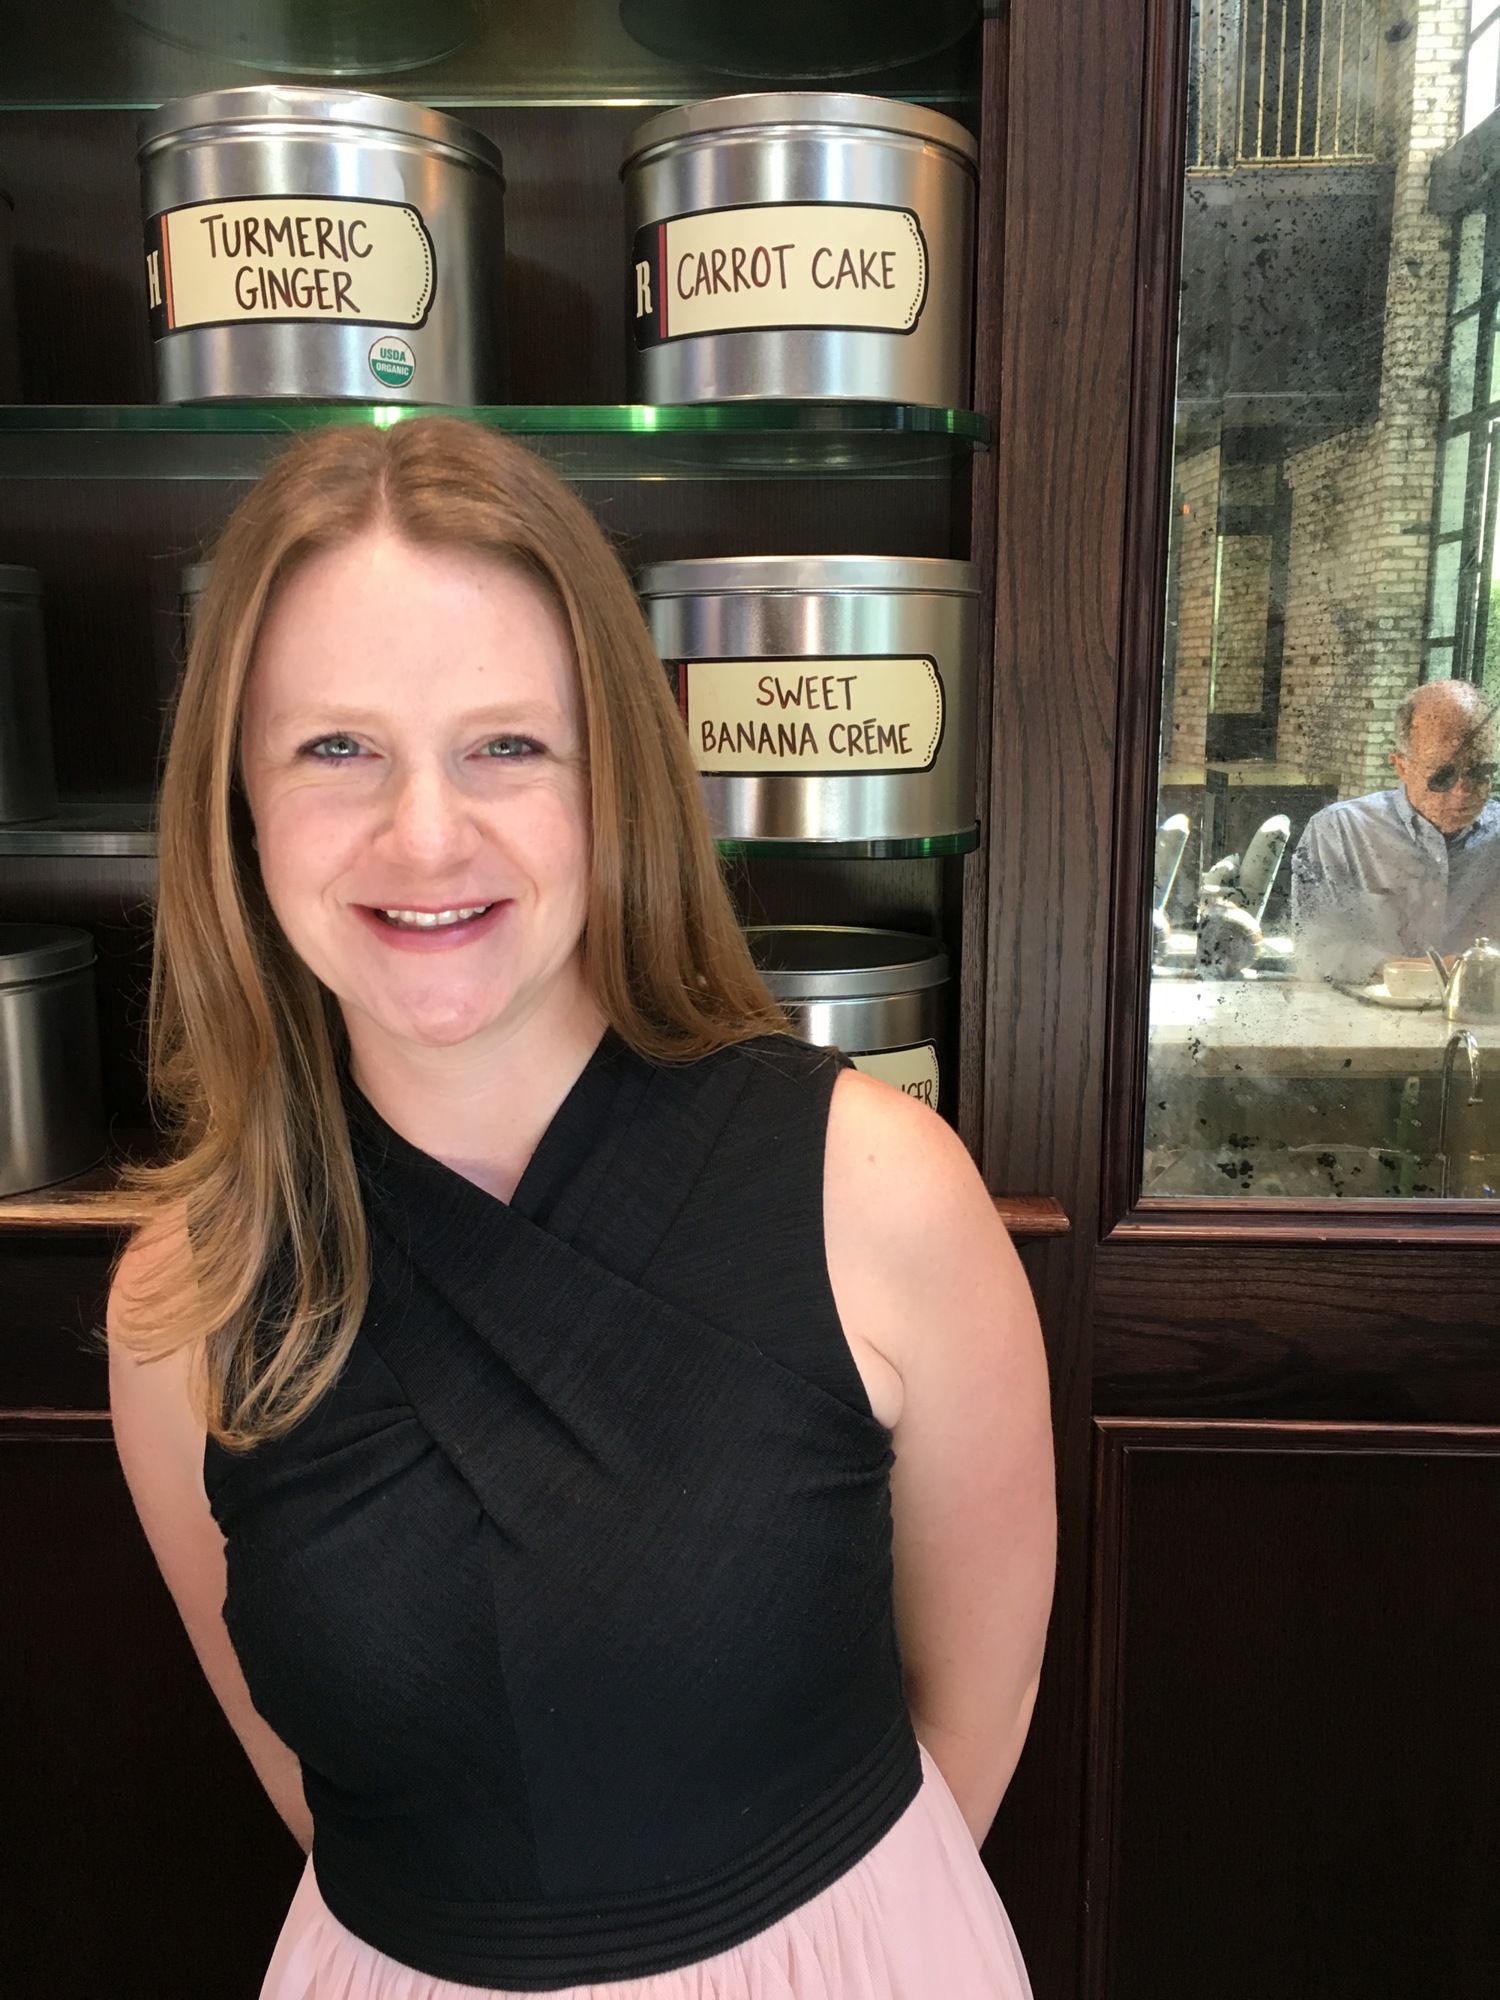 Courtesy. Abigail StClair, founder and CEO of TeBella Tea Co., wants to open more TeBella stores, possibly two or three within the next five years.